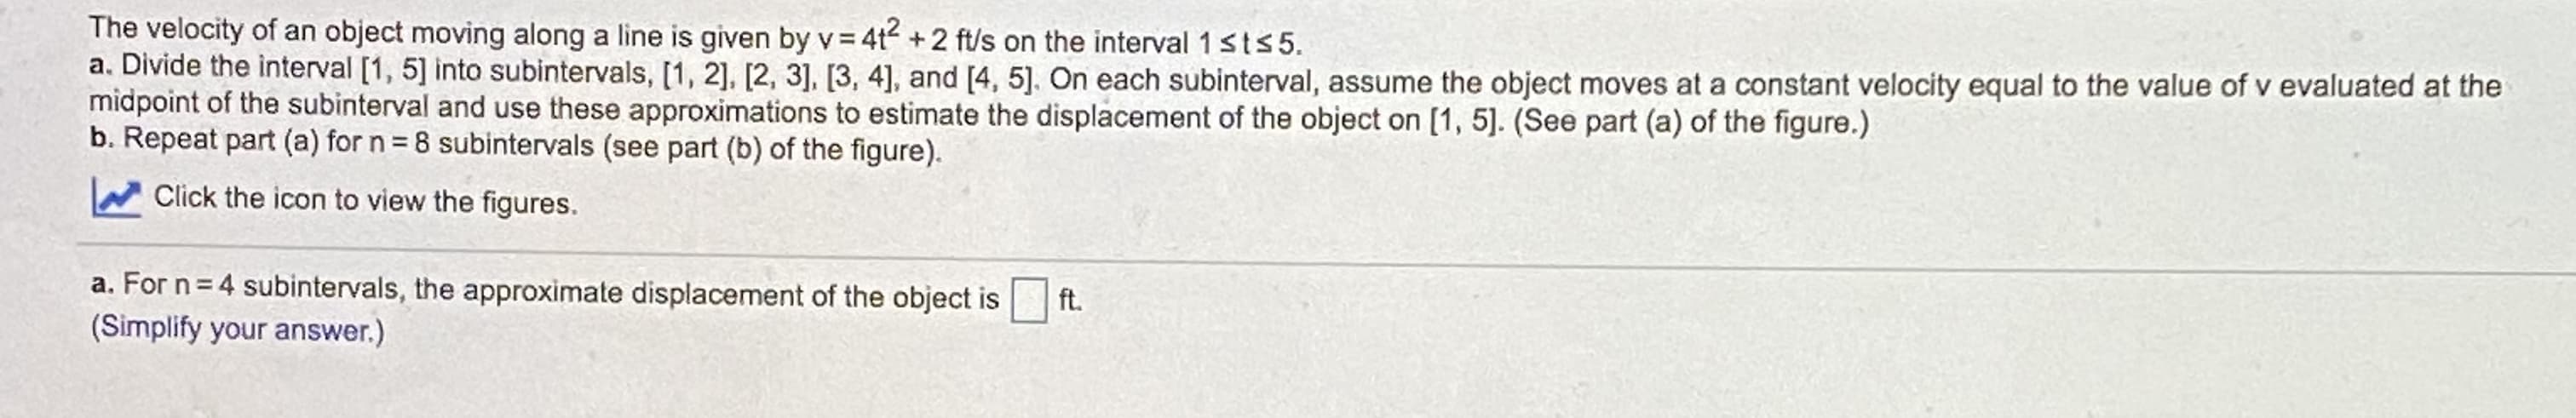 The velocity of an object moving along a line is given by v = 4t +2 ft/s on the interval 1sts5.
a. Divide the interval [1, 5] into subintervals, [1, 2], [2, 3], [3, 4], and [4, 5]. On each subinterval, assume the object moves at a constant velocity equal to the value of v evaluated at the
midpoint of the subinterval and use these approximations to estimate the displacement of the object on [1, 5]. (See part (a) of the figure.)
b. Repeat part (a) for n = 8 subintervals (see part (b) of the figure).
Click the icon to view the figures.
a. For n= 4 subintervals, the approximate displacement of the object is
(Simplify your answer.)
ft.
